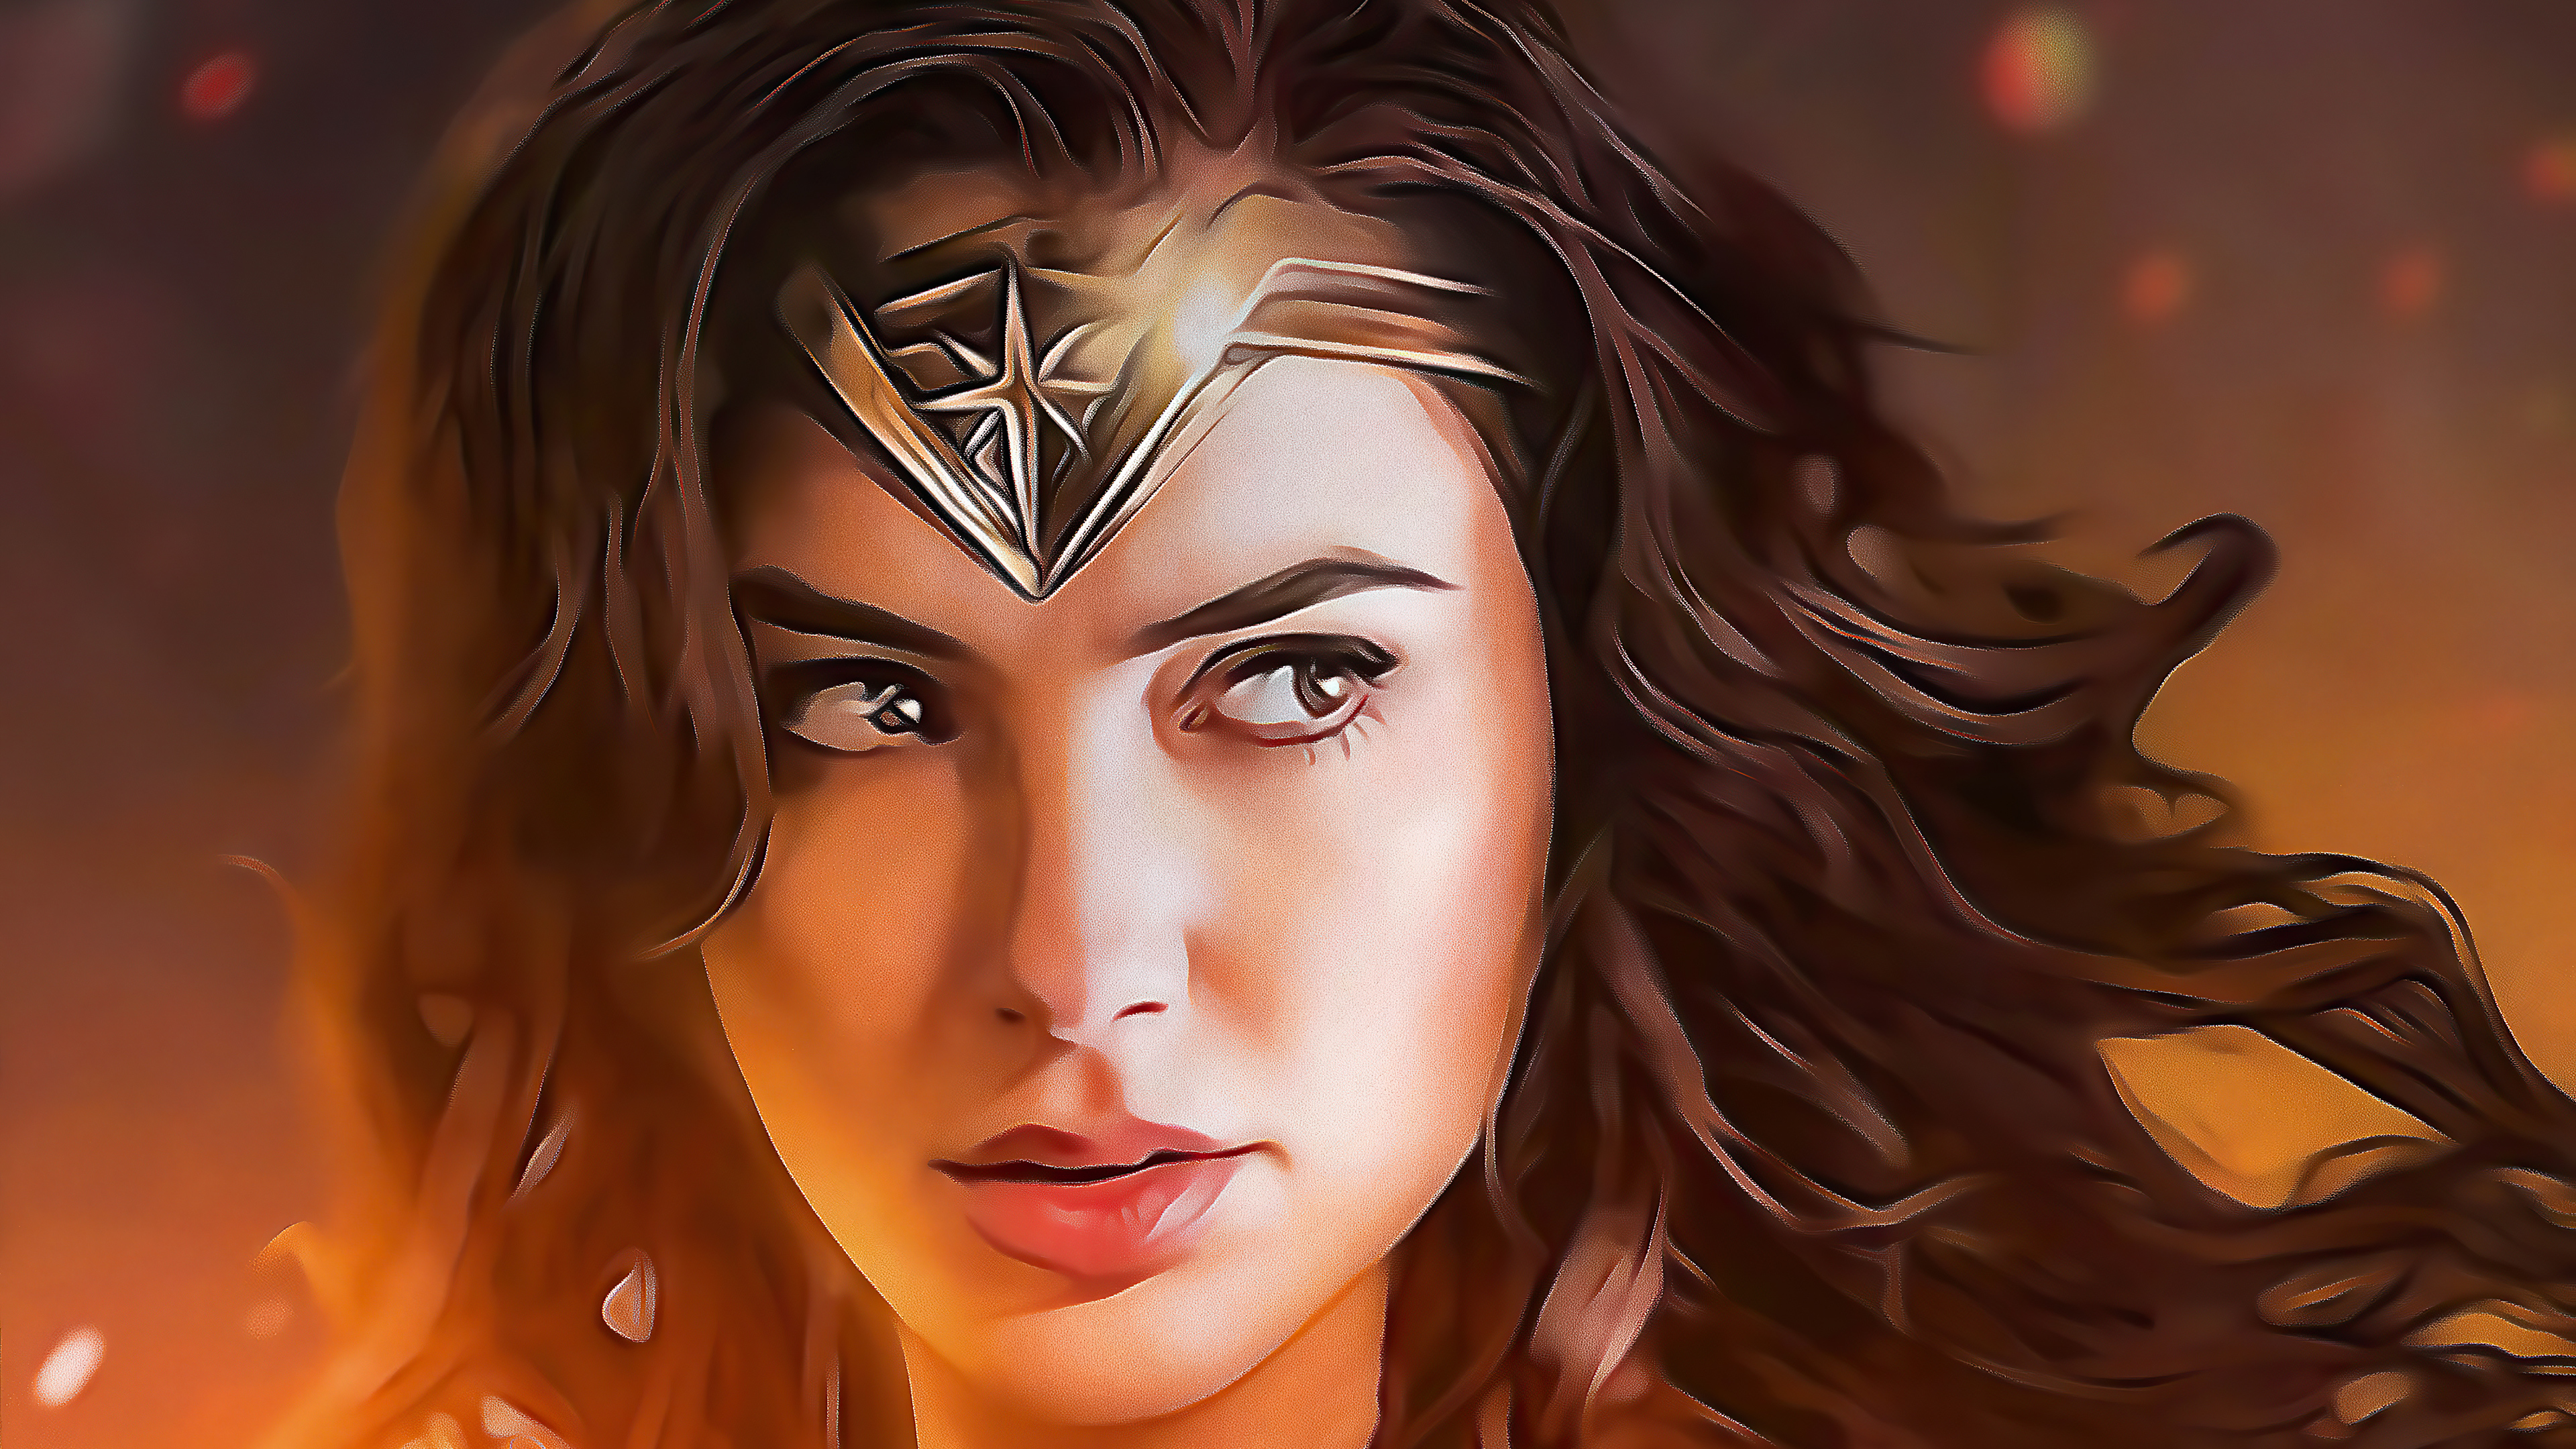 The Wonder Woman Fanart 4k, HD Superheroes, 4k Wallpapers, Images,  Backgrounds, Photos and Pictures